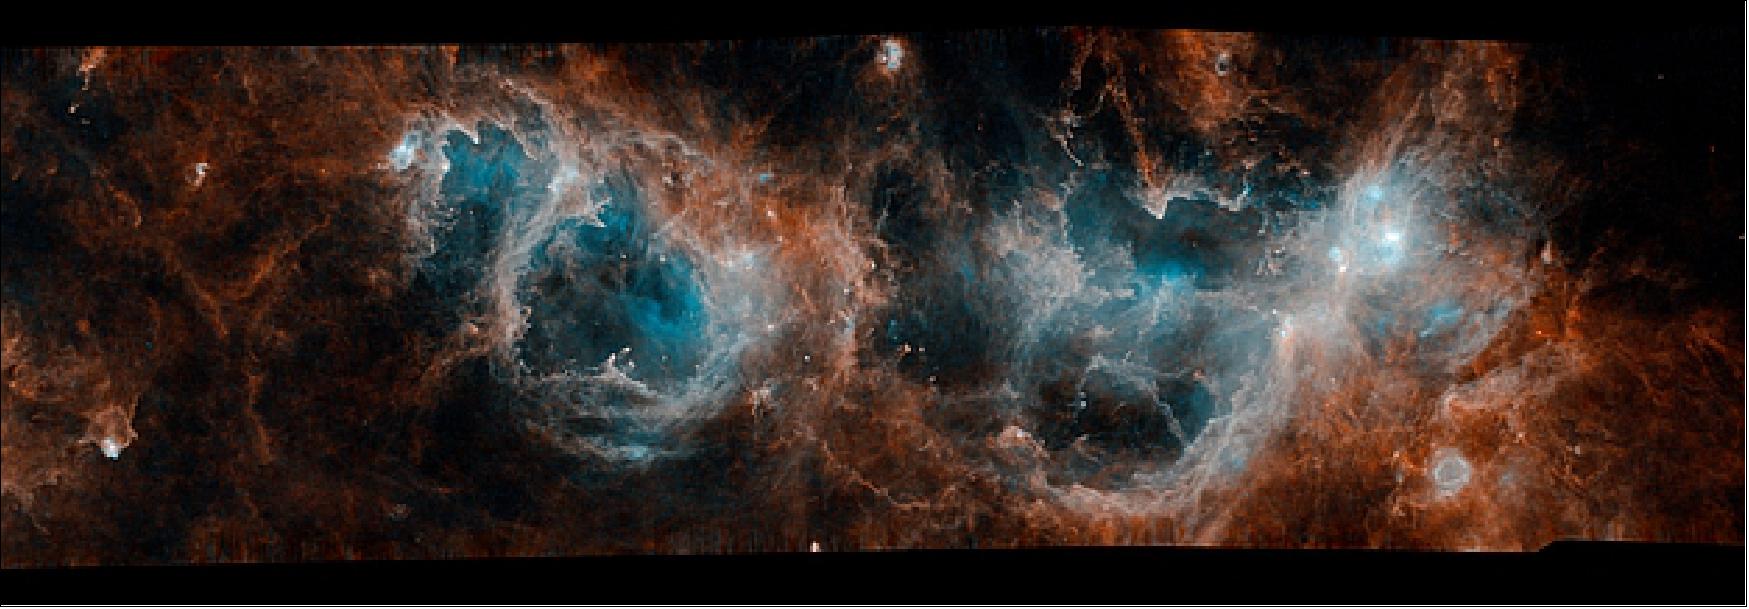 Figure 35: Space Science Image of the Week: HSO image of the W3/W4/W5 complex in the Milky Way. This two-color image combines Herschel observations at 70 µm (cyan) and 100 µm (orange), and spans about 8.4º by 2.9º; north is up and east to the left. [image credit: ESA/Herschel/NASA/JPL-Caltech, CC BY-SA 3.0 IGO; Acknowledgement: R. Hurt (JPL-Caltech)]